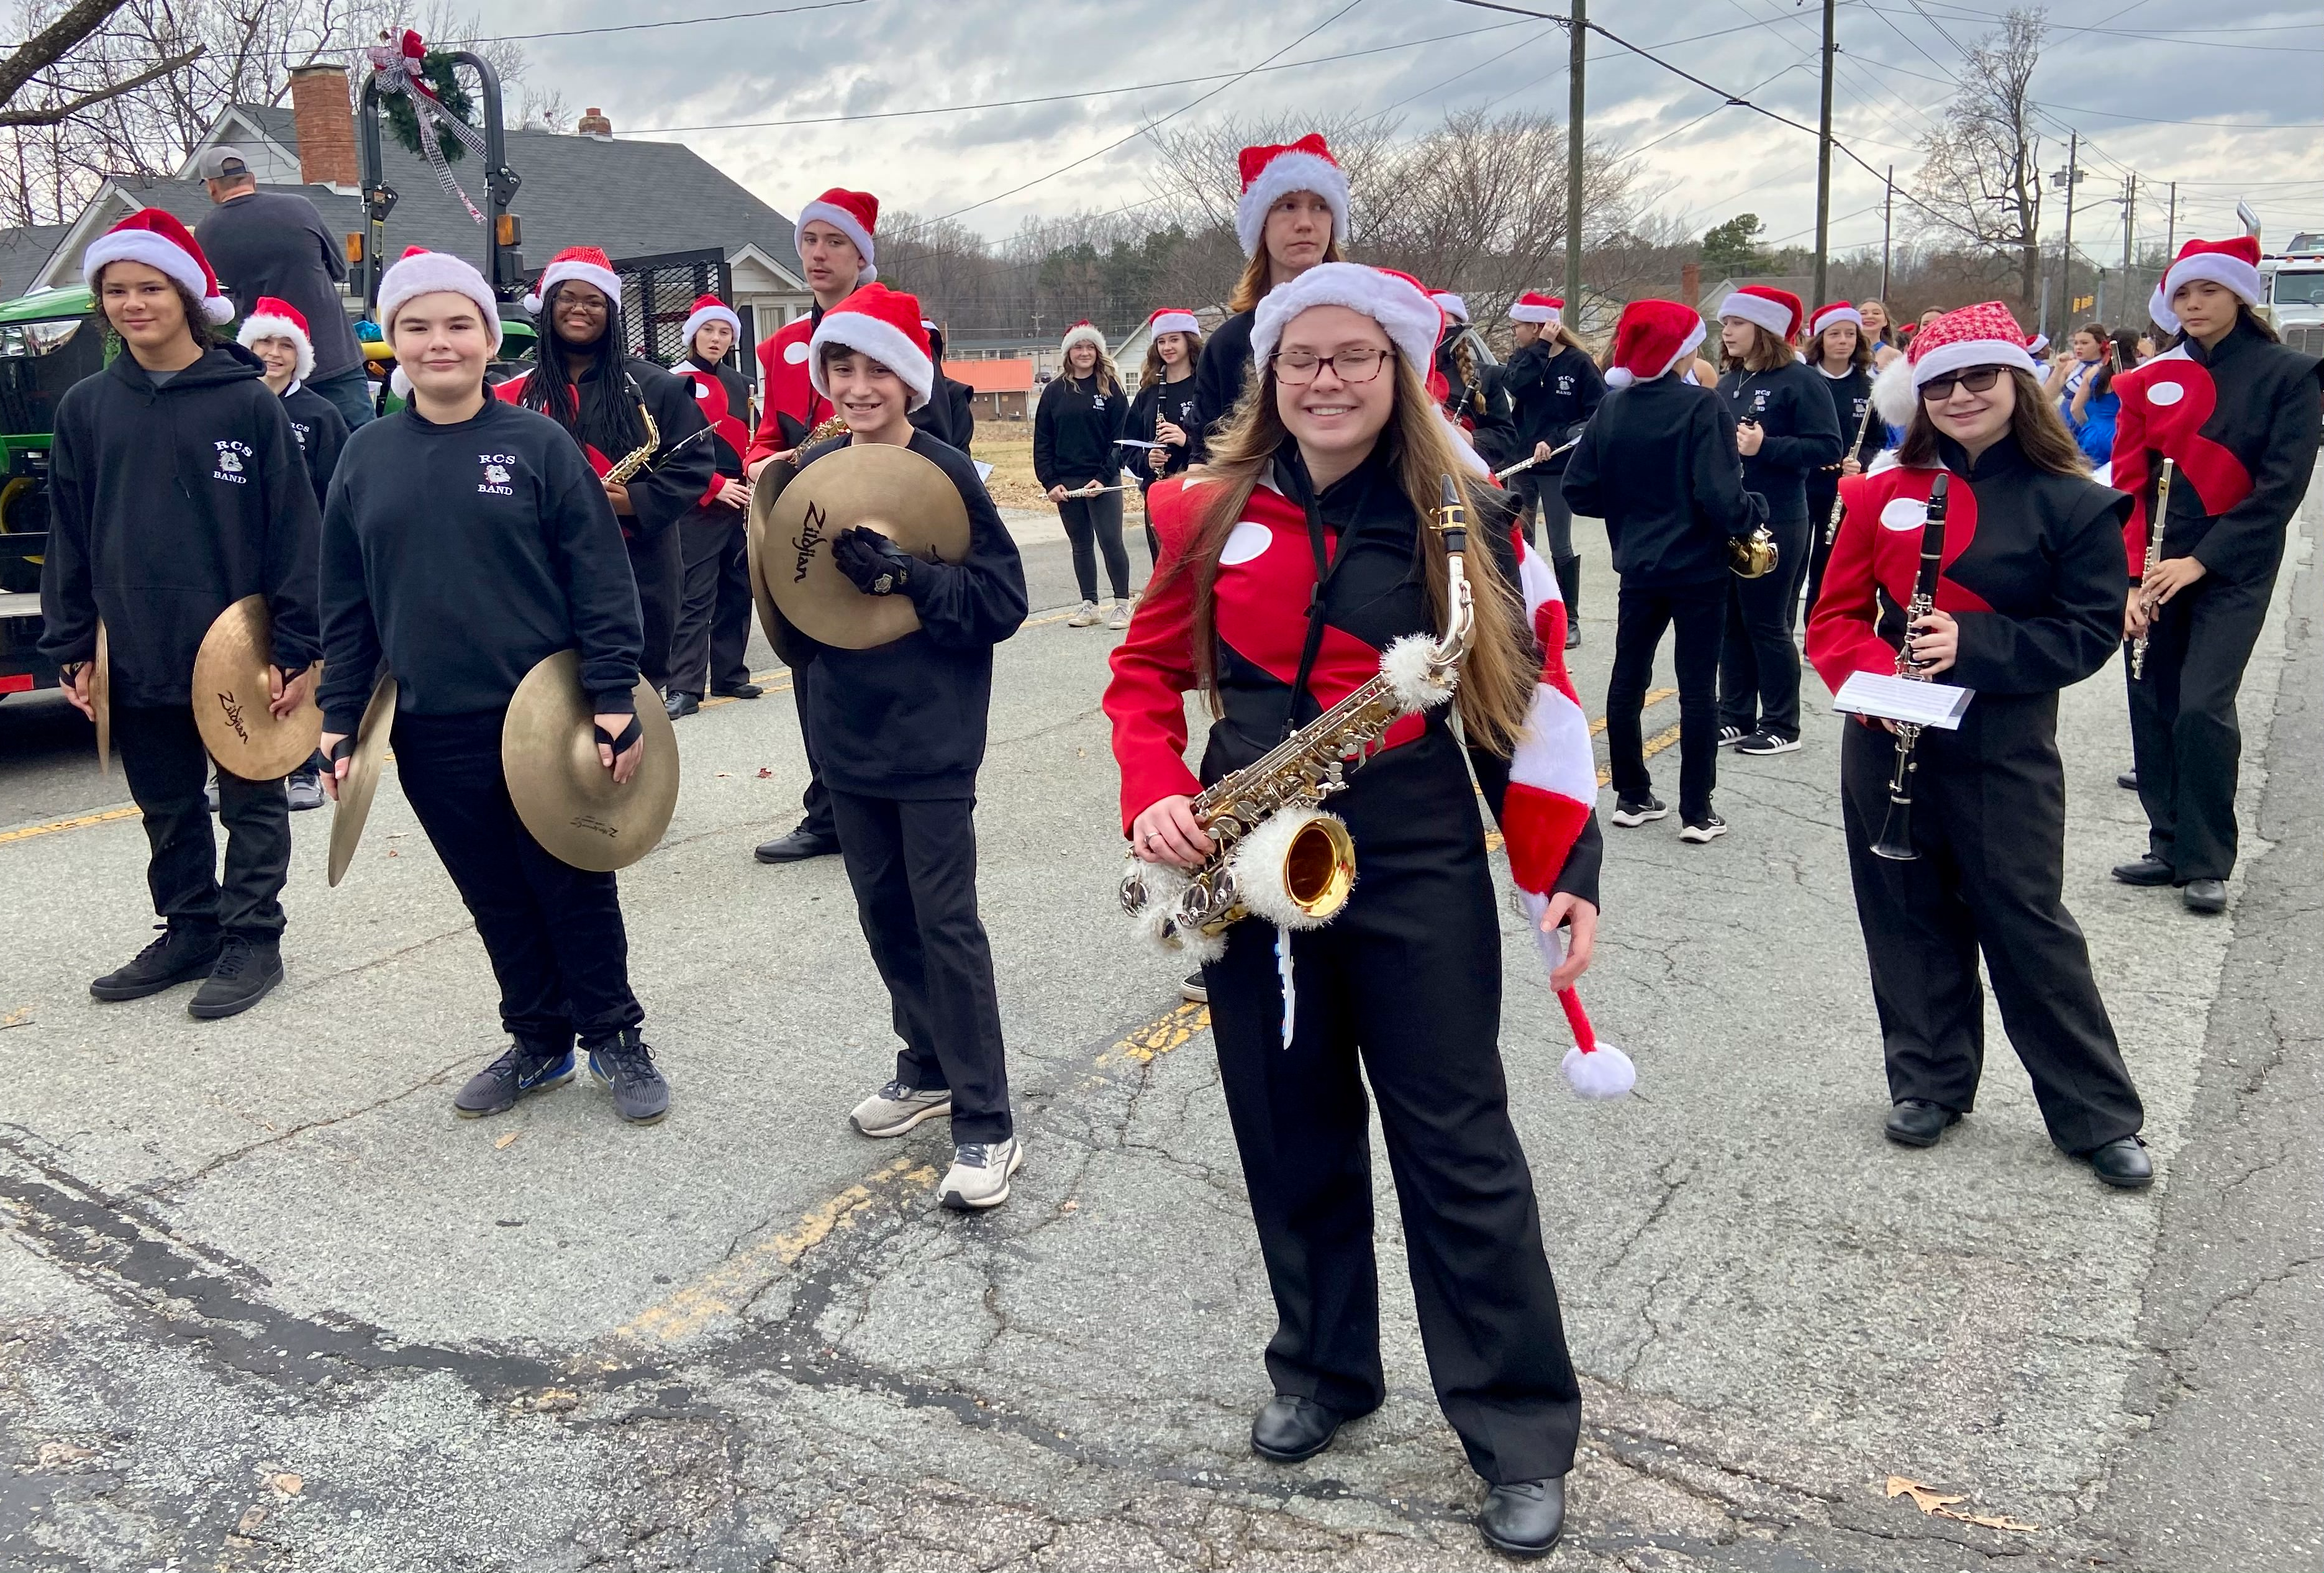 Student Marching Band members hold their instruments, wear santa hats and prepare for the parade